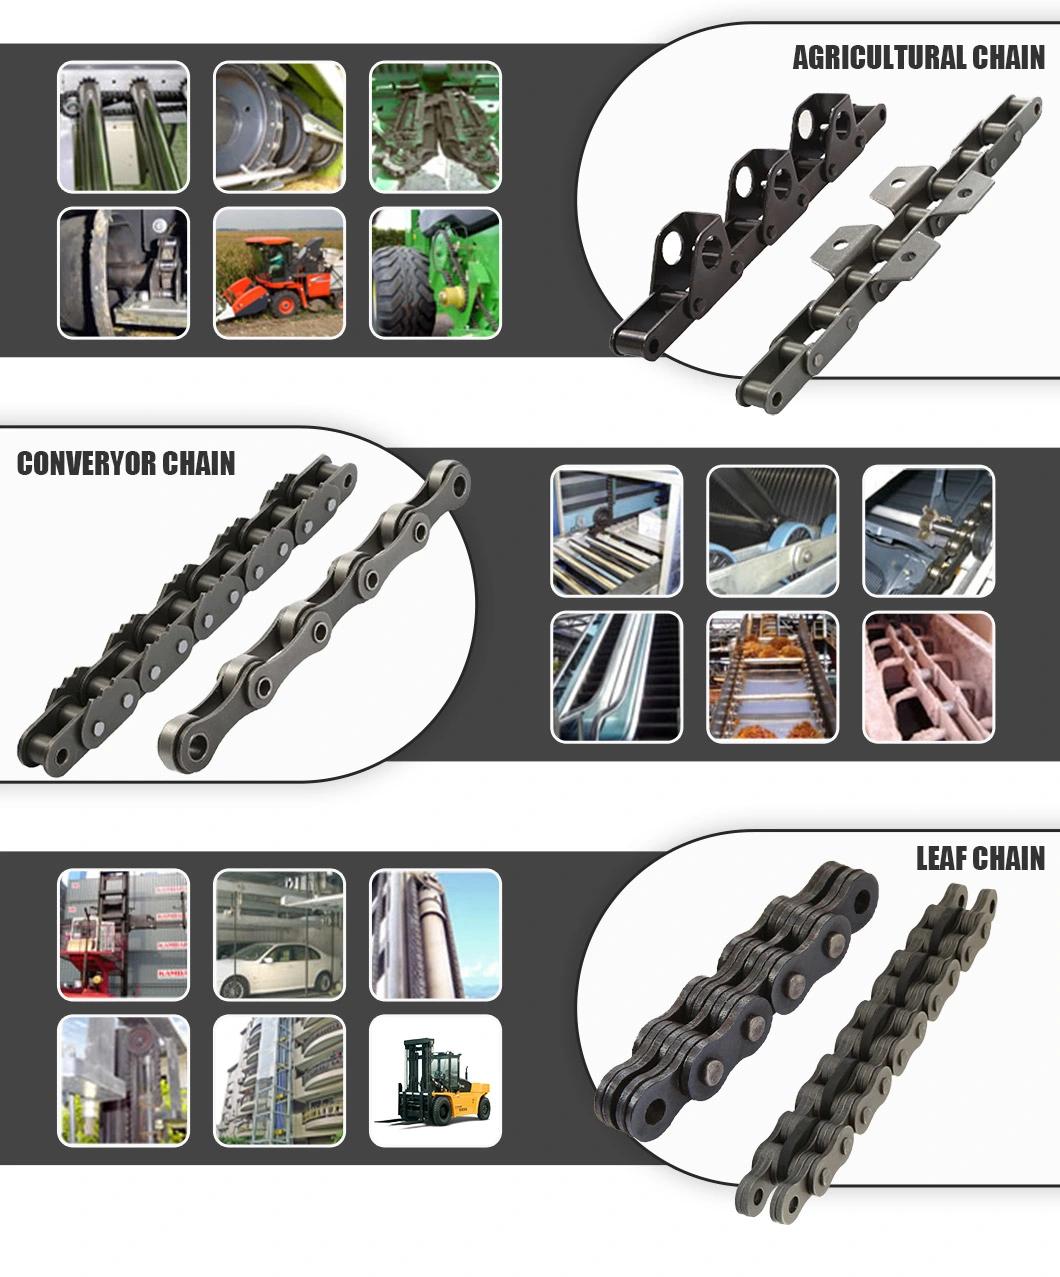 Widely Used C Type Steel Agricultural Chain with Attachments (CA2060-C6E)